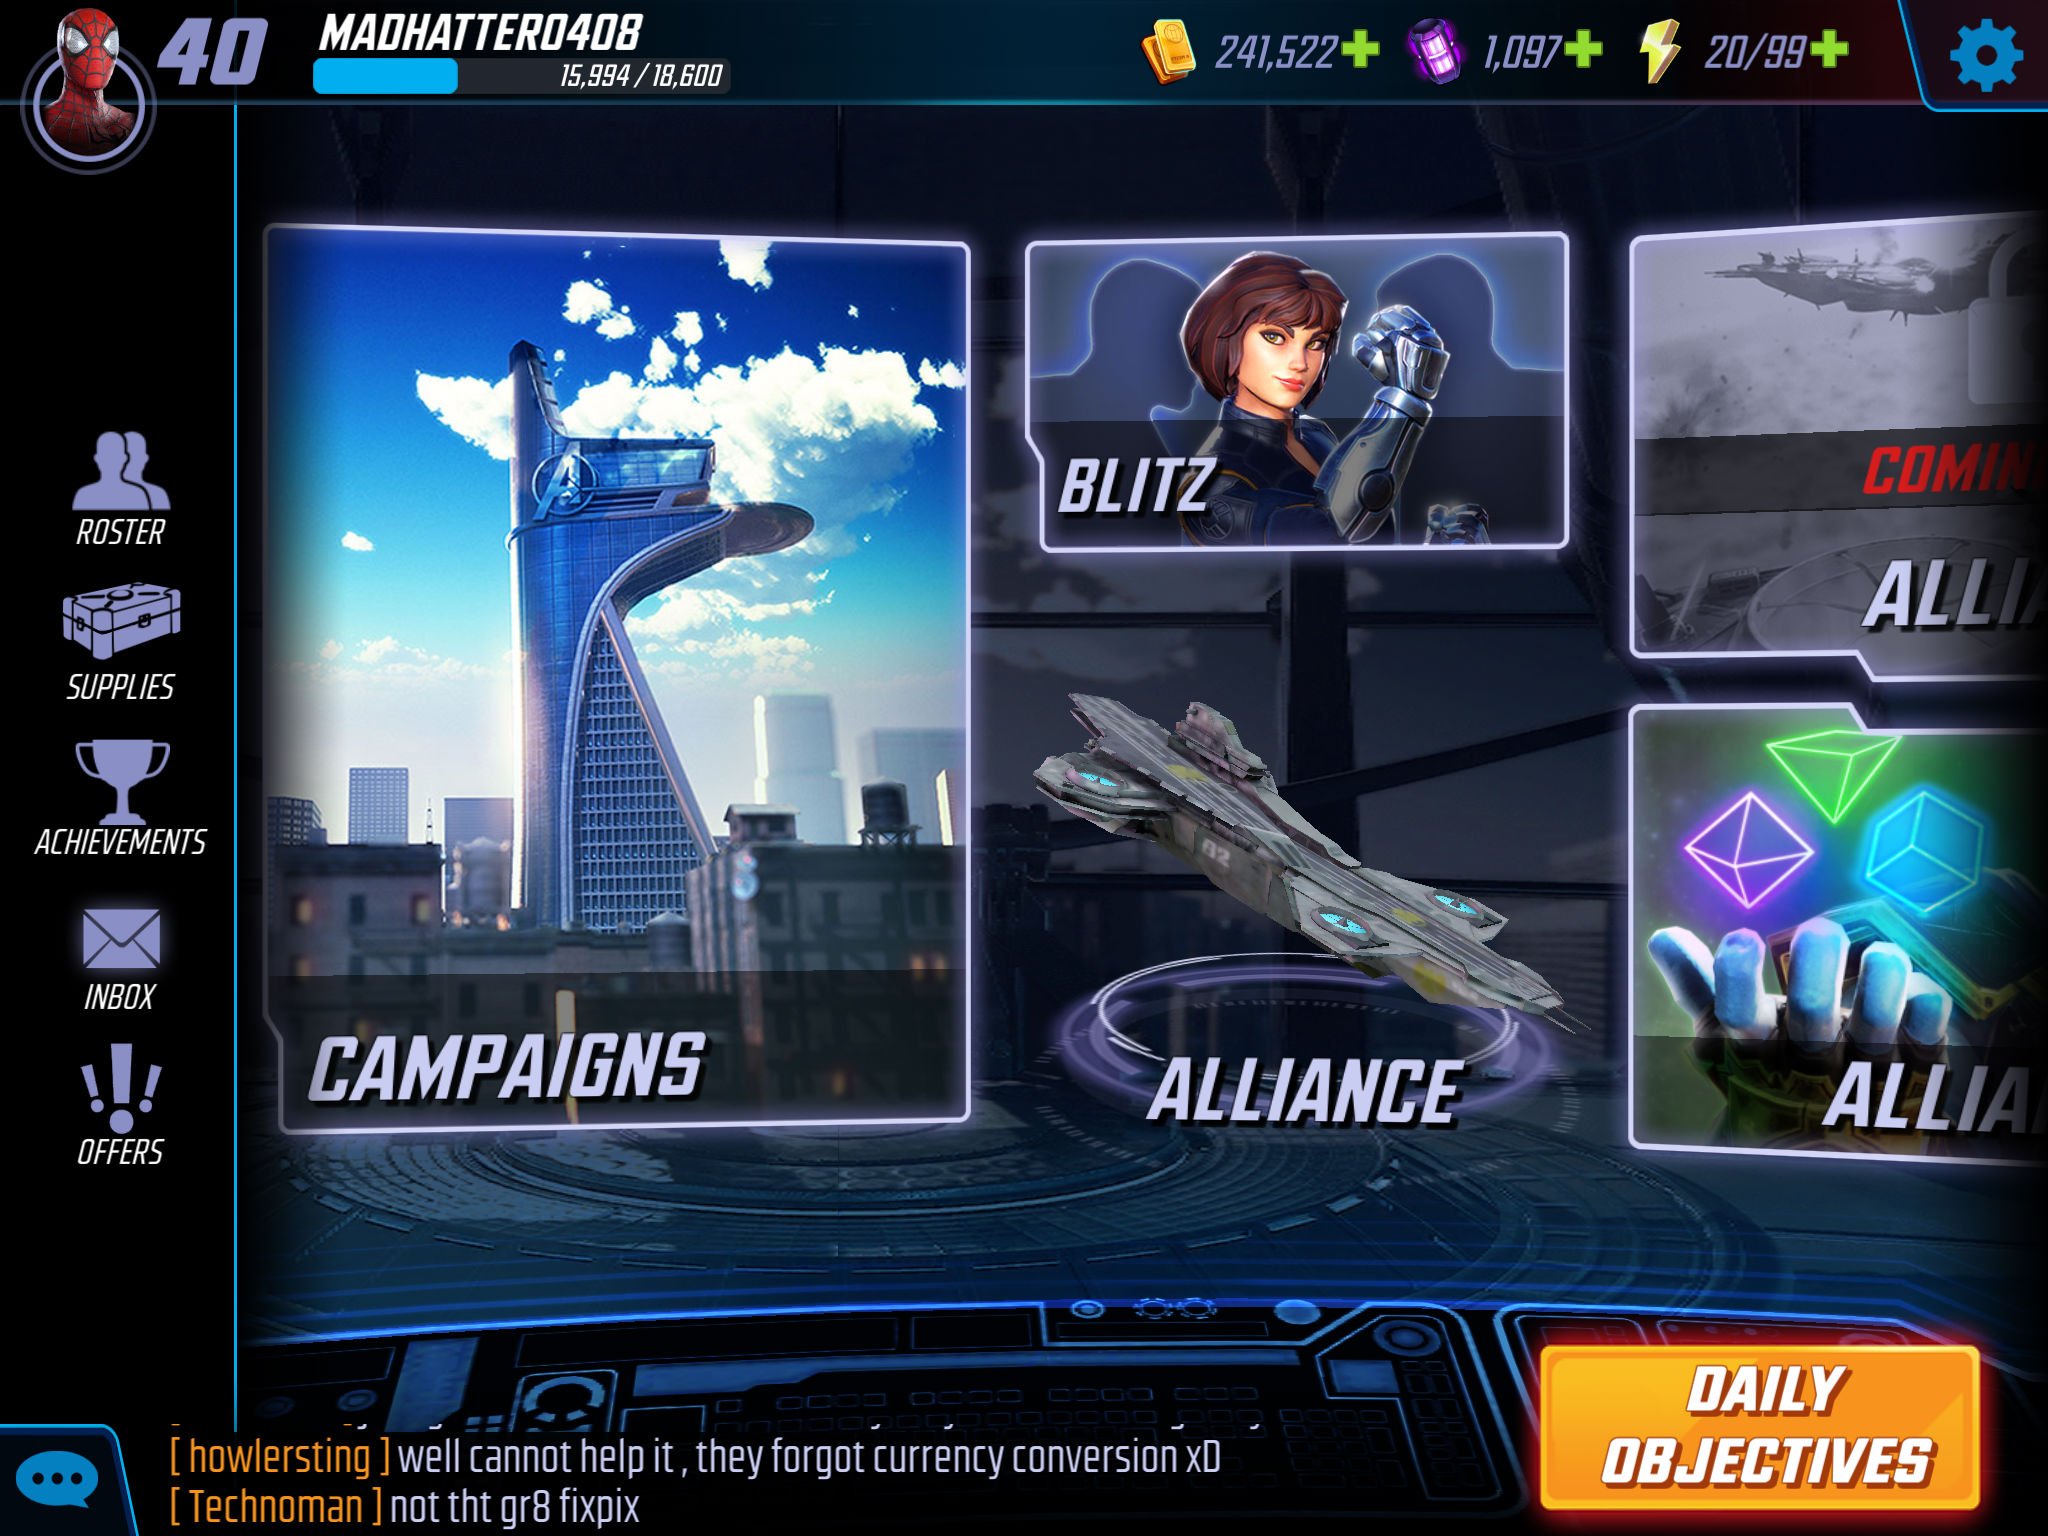 MARVEL Strike Force: Building the Perfect Team